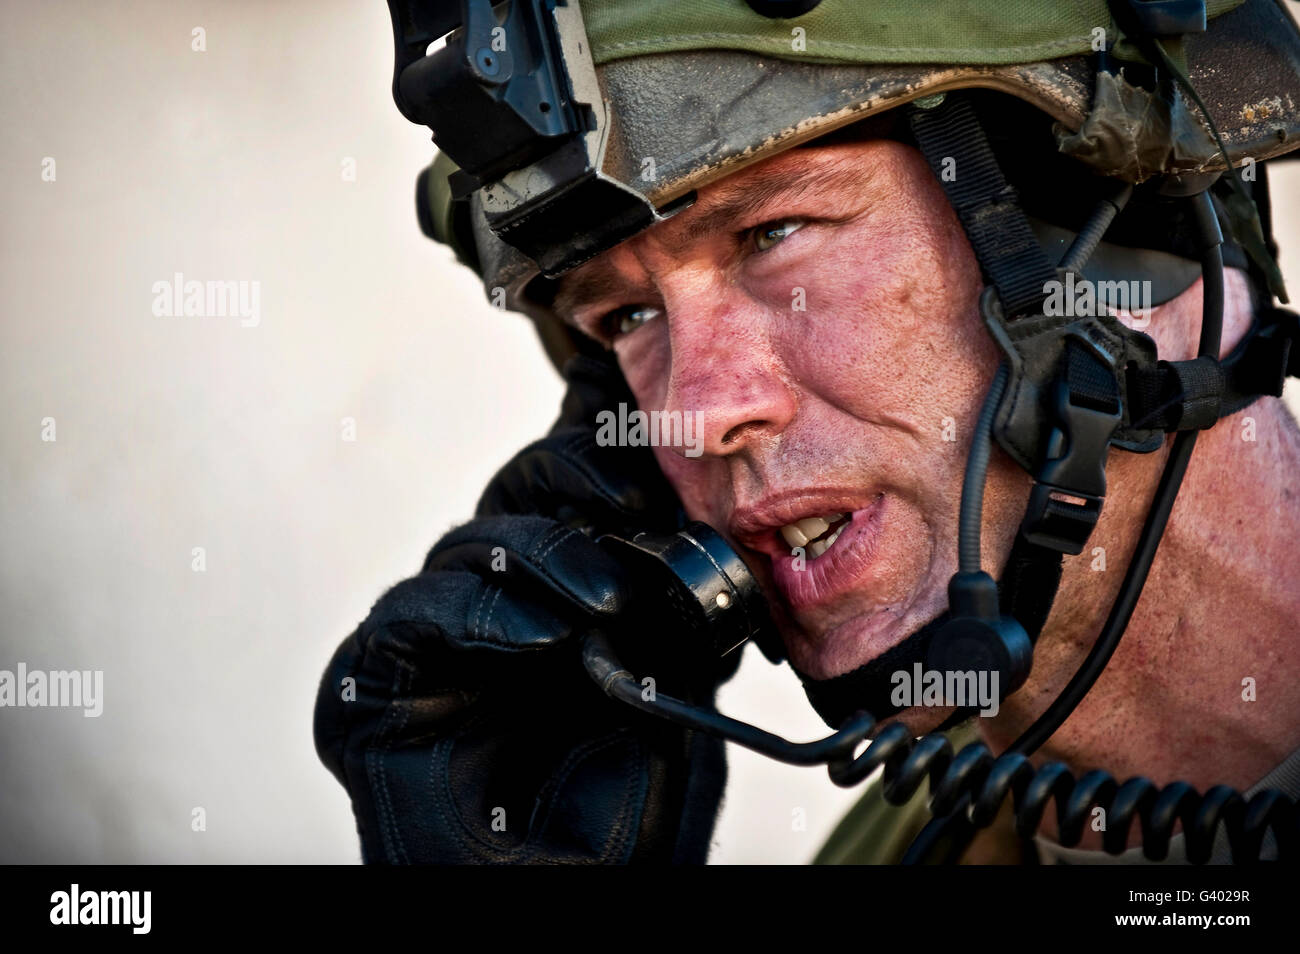 U.S. Air Force Sergeant calls for a simulated air strike. Stock Photo